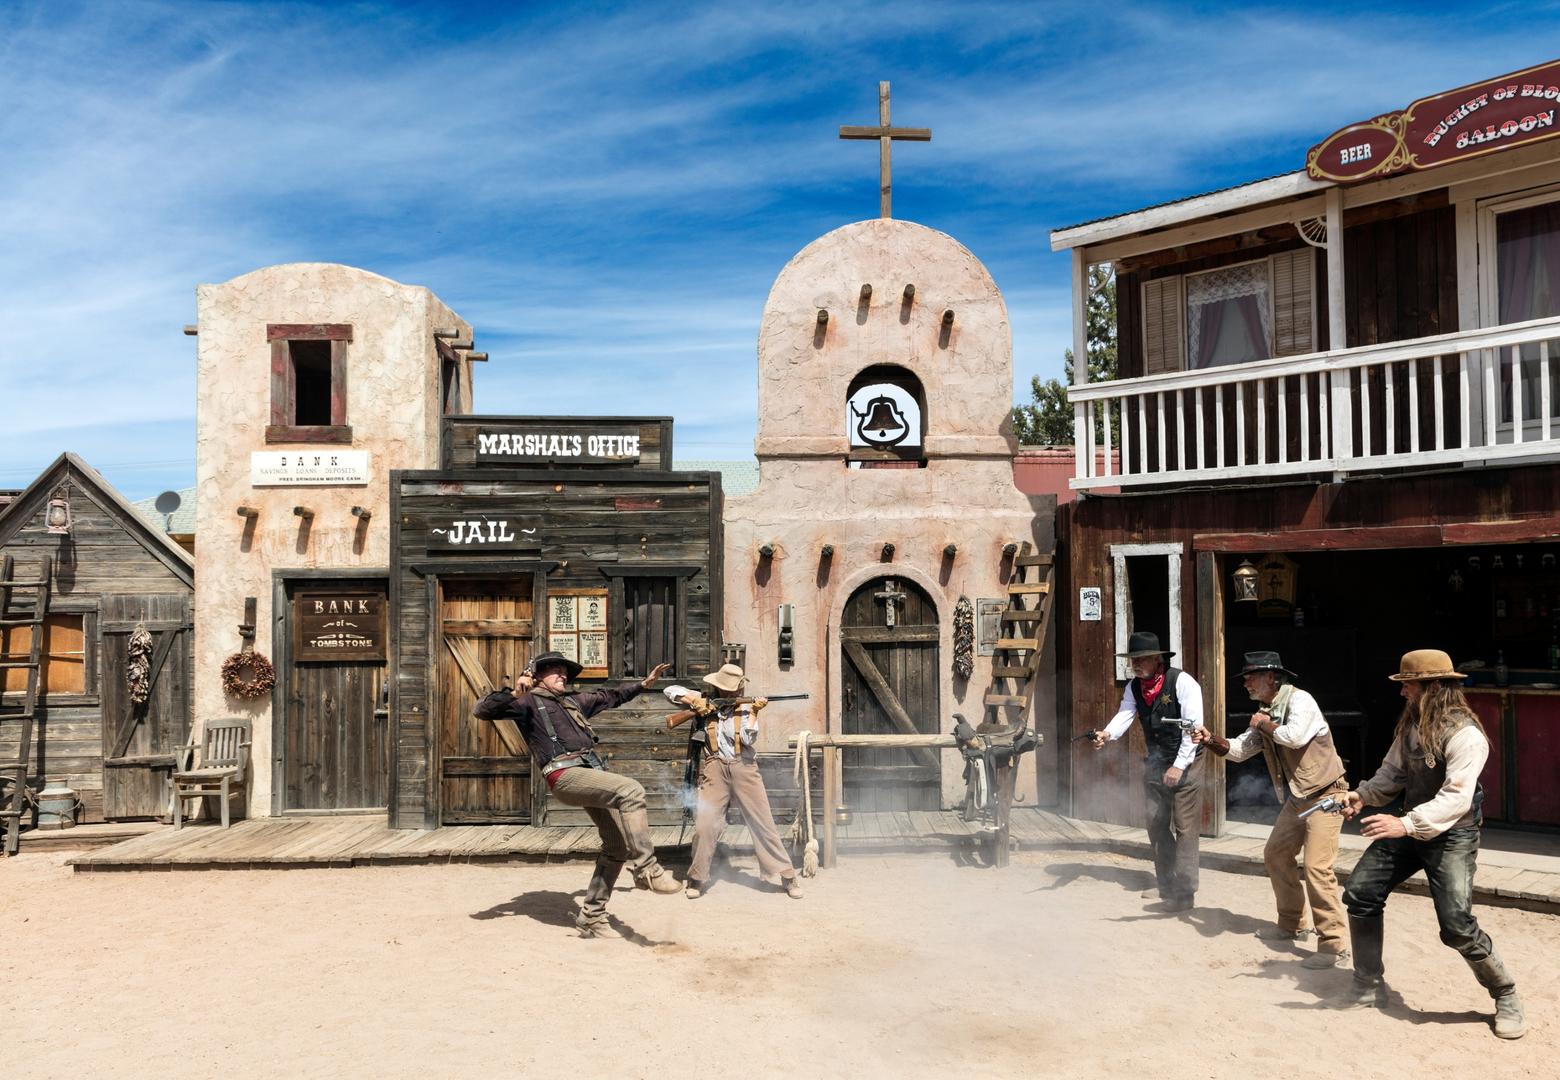 In the American West, mythology and stereotypes are still perpetuated through spaghetti western films and mock shootouts such as this one in Old Tombstone in southeast Arizona. Journalism must follow certain tenets, and exists to debunk myth. Creative Commons photo